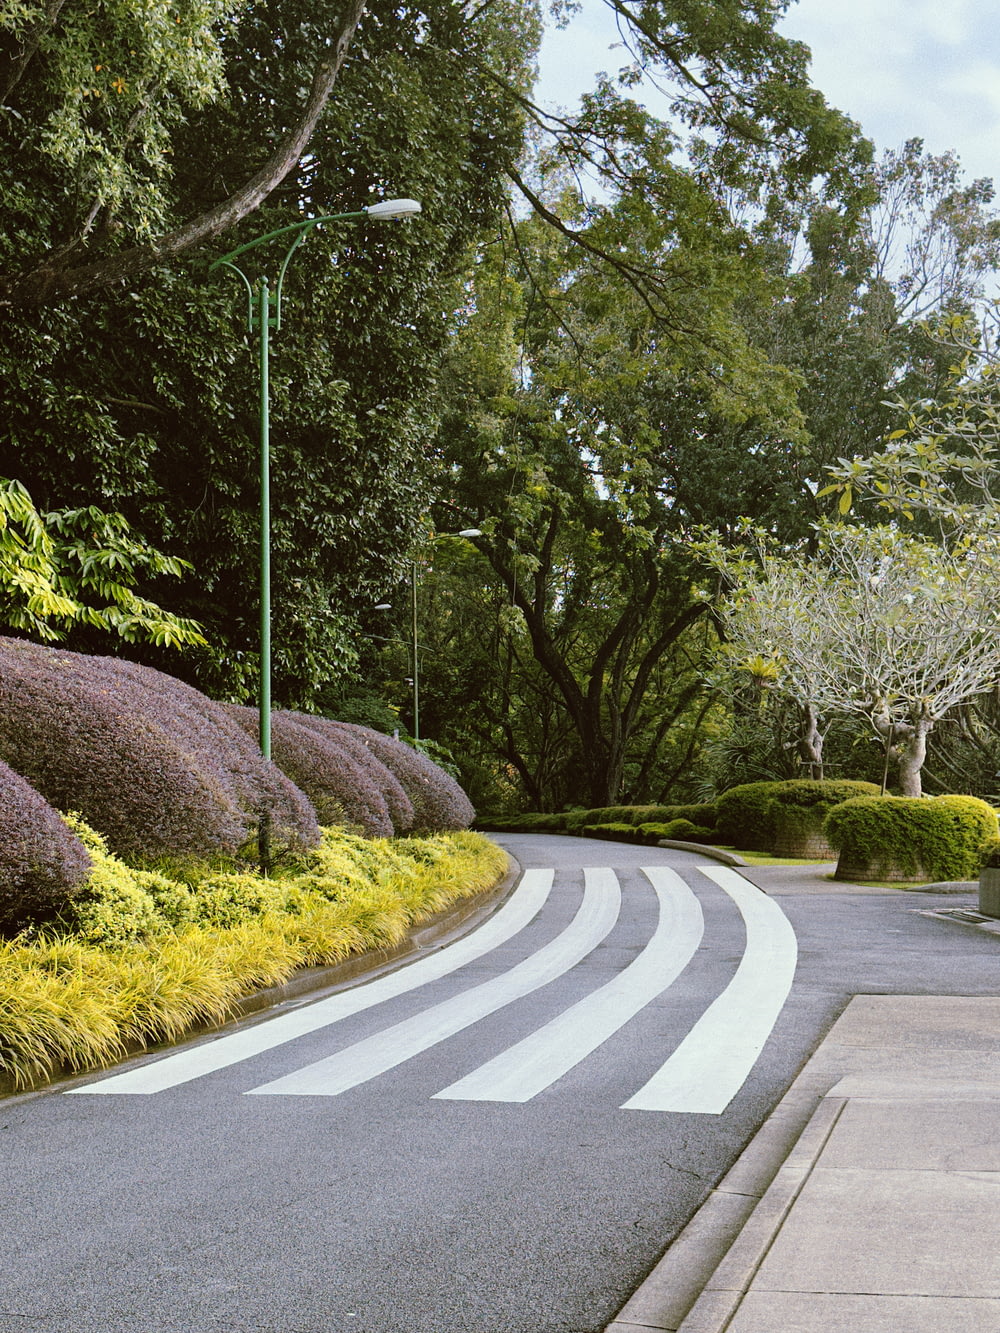 a curved road with trees and bushes on both sides